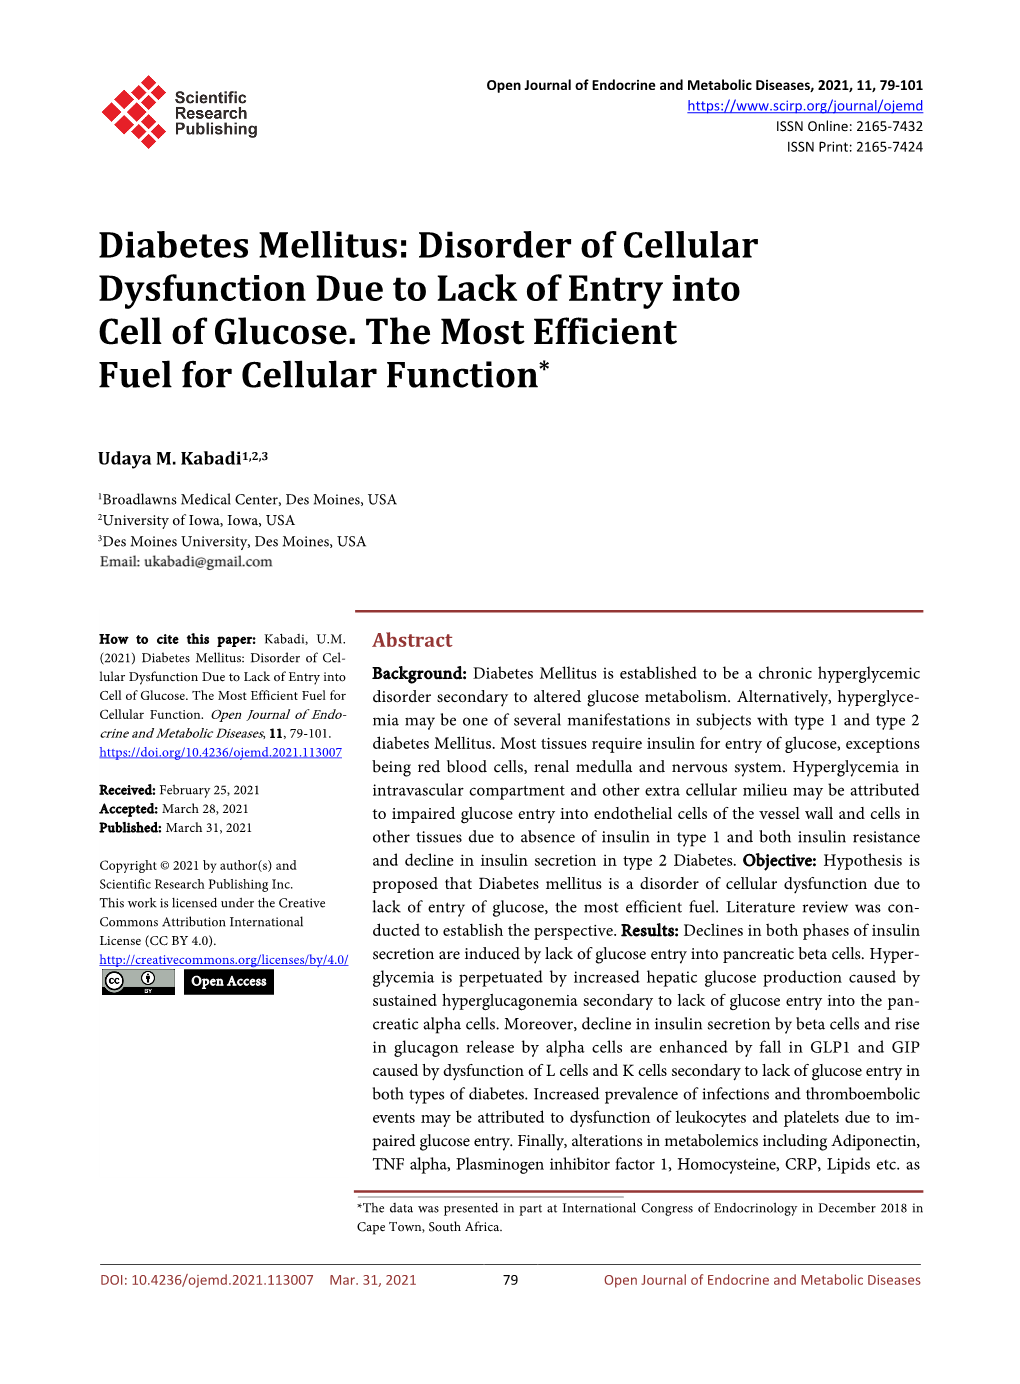 Diabetes Mellitus: Disorder of Cellular Dysfunction Due to Lack of Entry Into Cell of Glucose